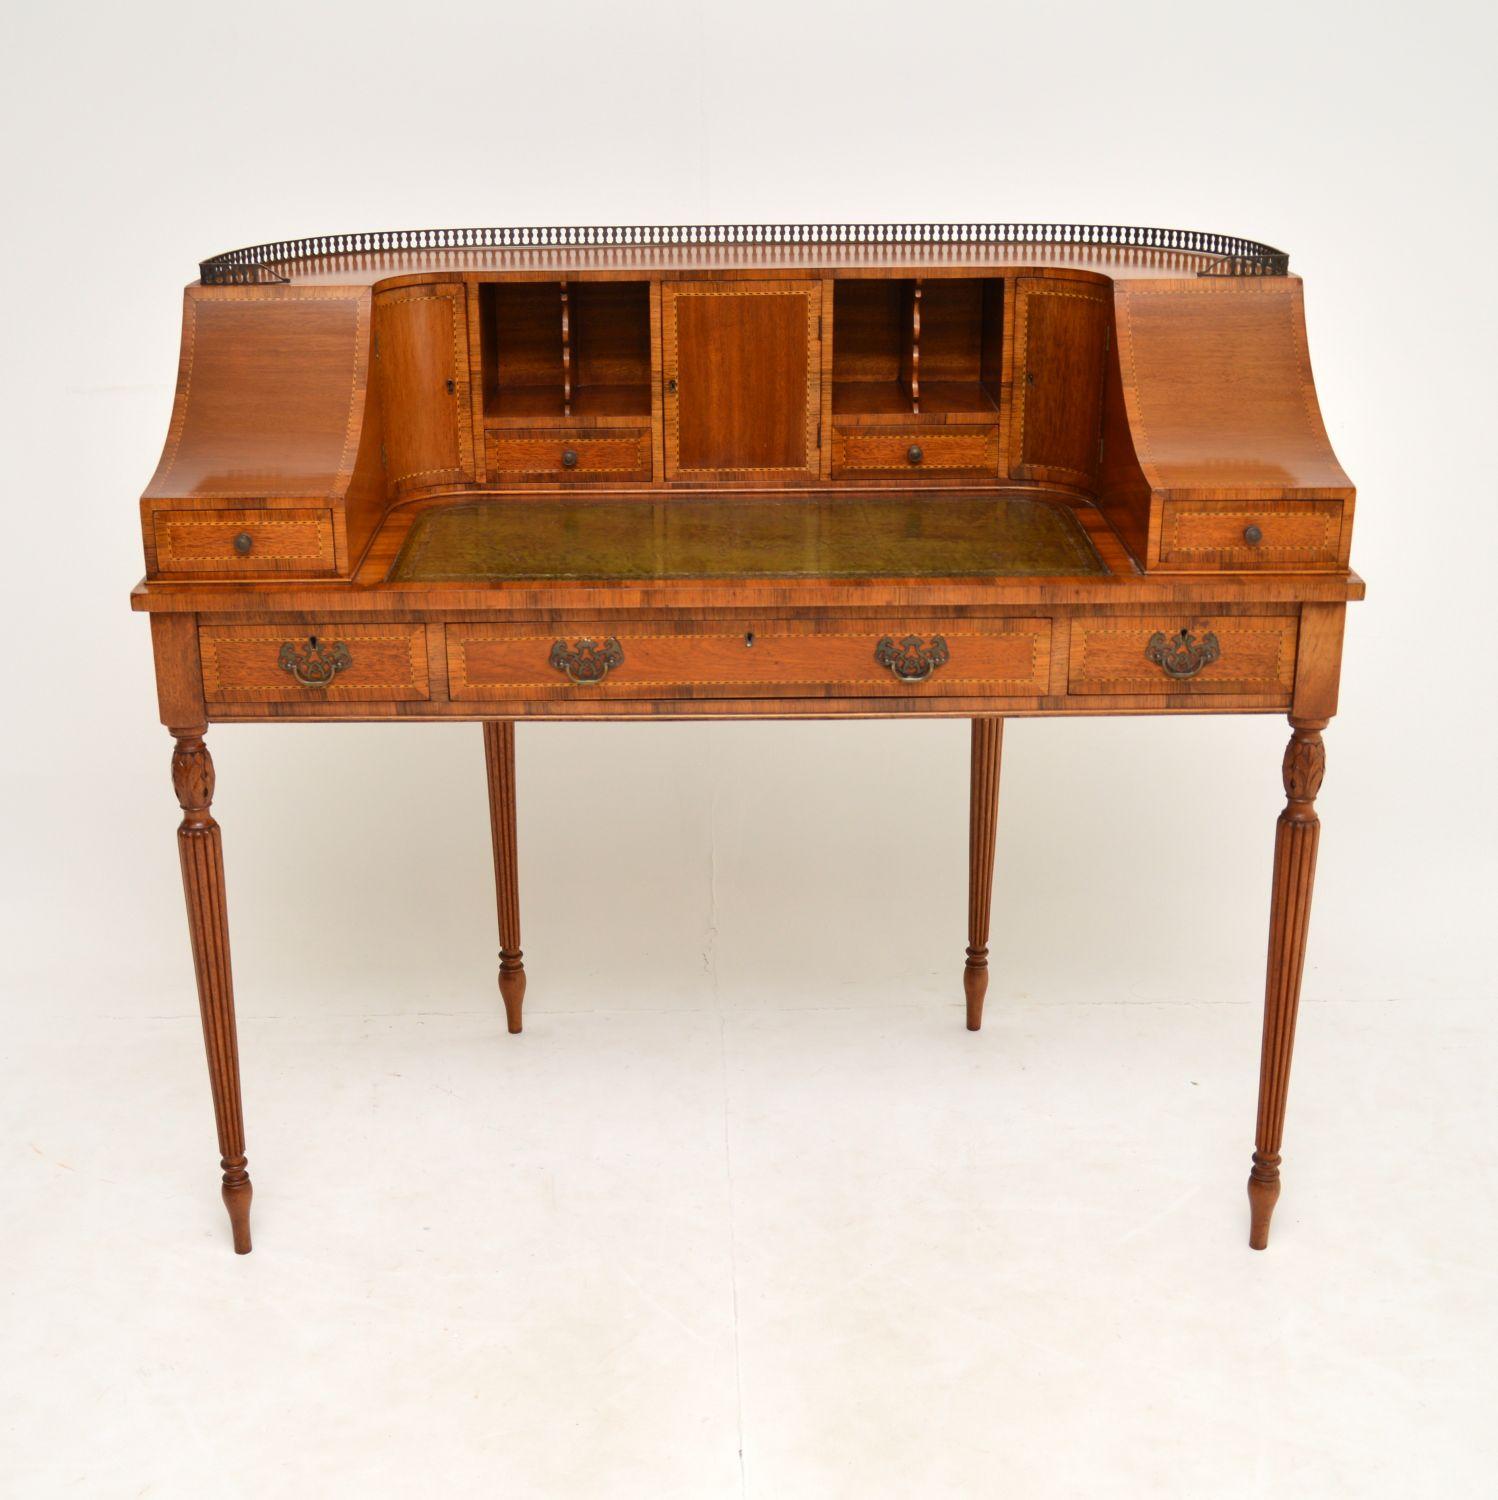 A stunning Carlton house desk, beautifully made from mahogany & walnut, with satinwood inlays. This dates from around the 1950’s period & whoever made this had a very good attention to detail.

It is of extremely fine quality, with many lovely